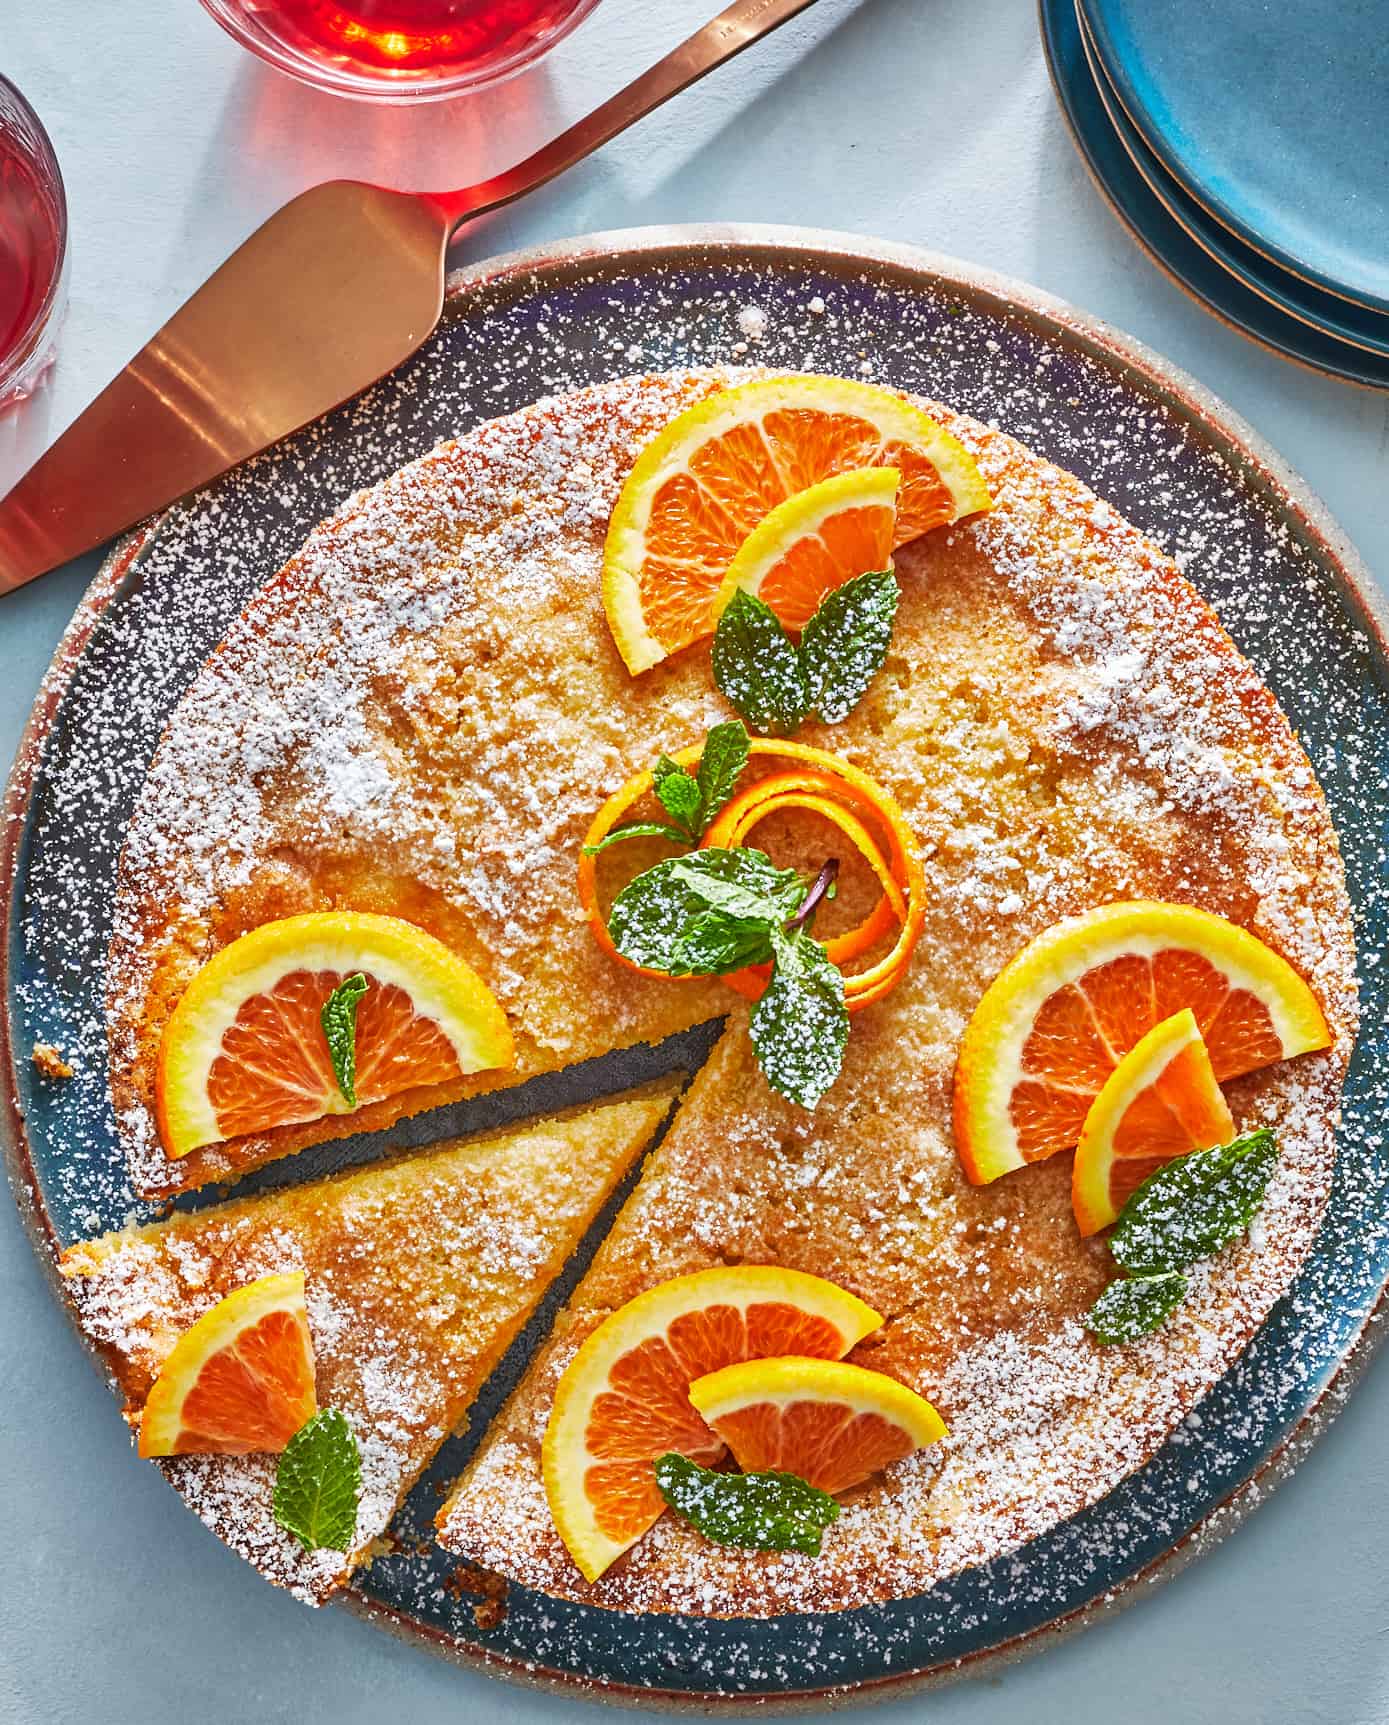 orange cardamom olive oil cake topped with orange slices on a plate with one slice cut.